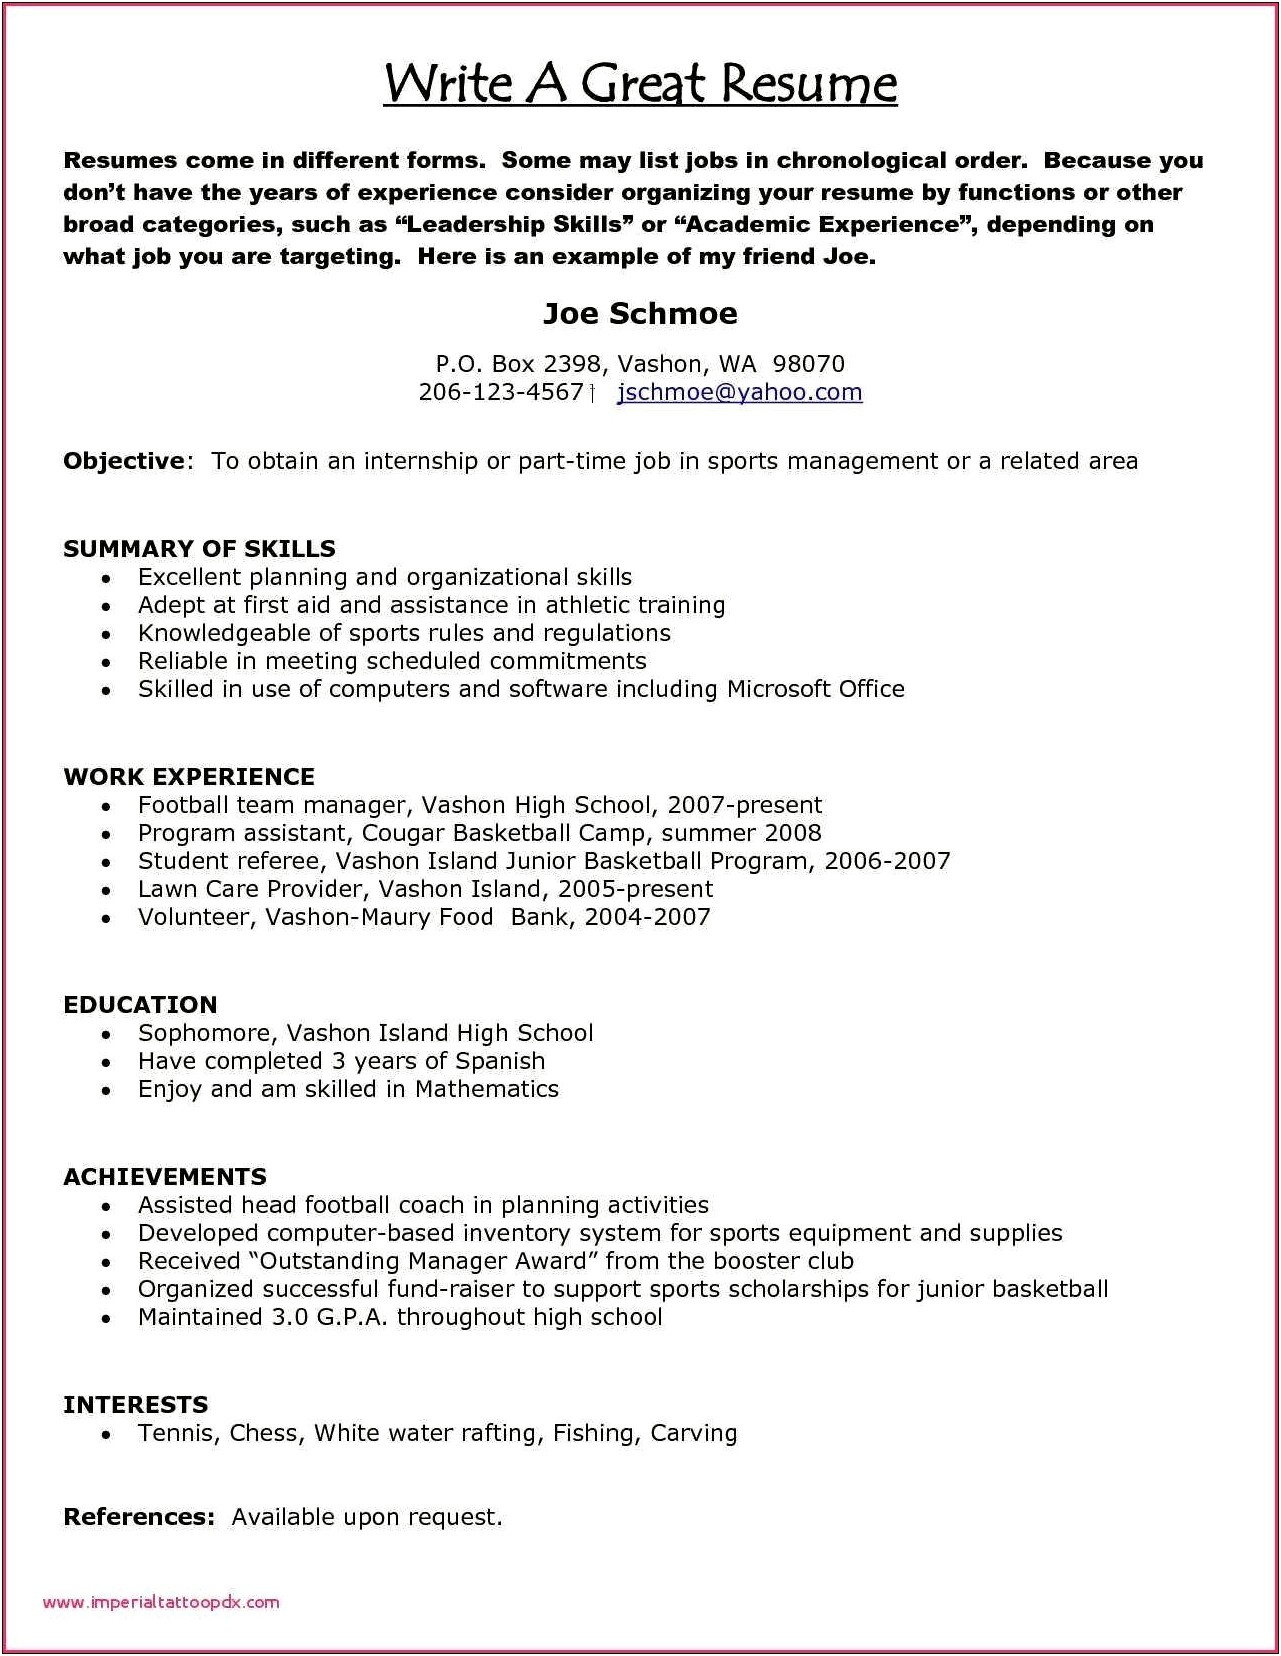 Summary For Resume For Part Time Job